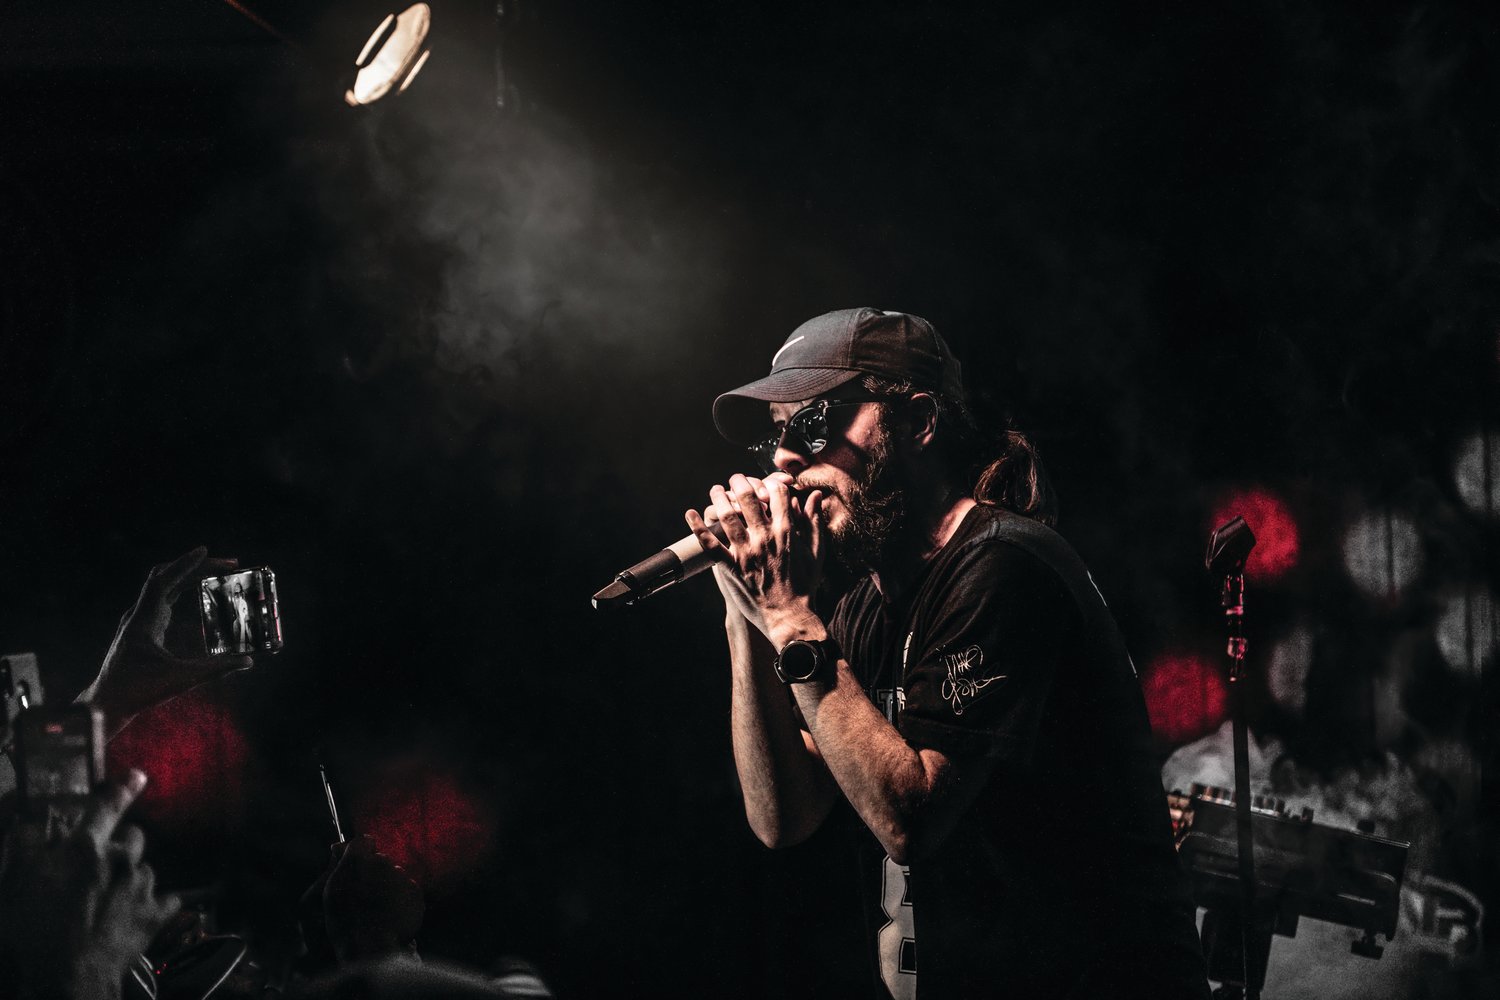 Better known as Ubi, Mike Viglione previously toured with his group Ces Cru before striking out on his own with his 2019 album “Under Bad Influence.”